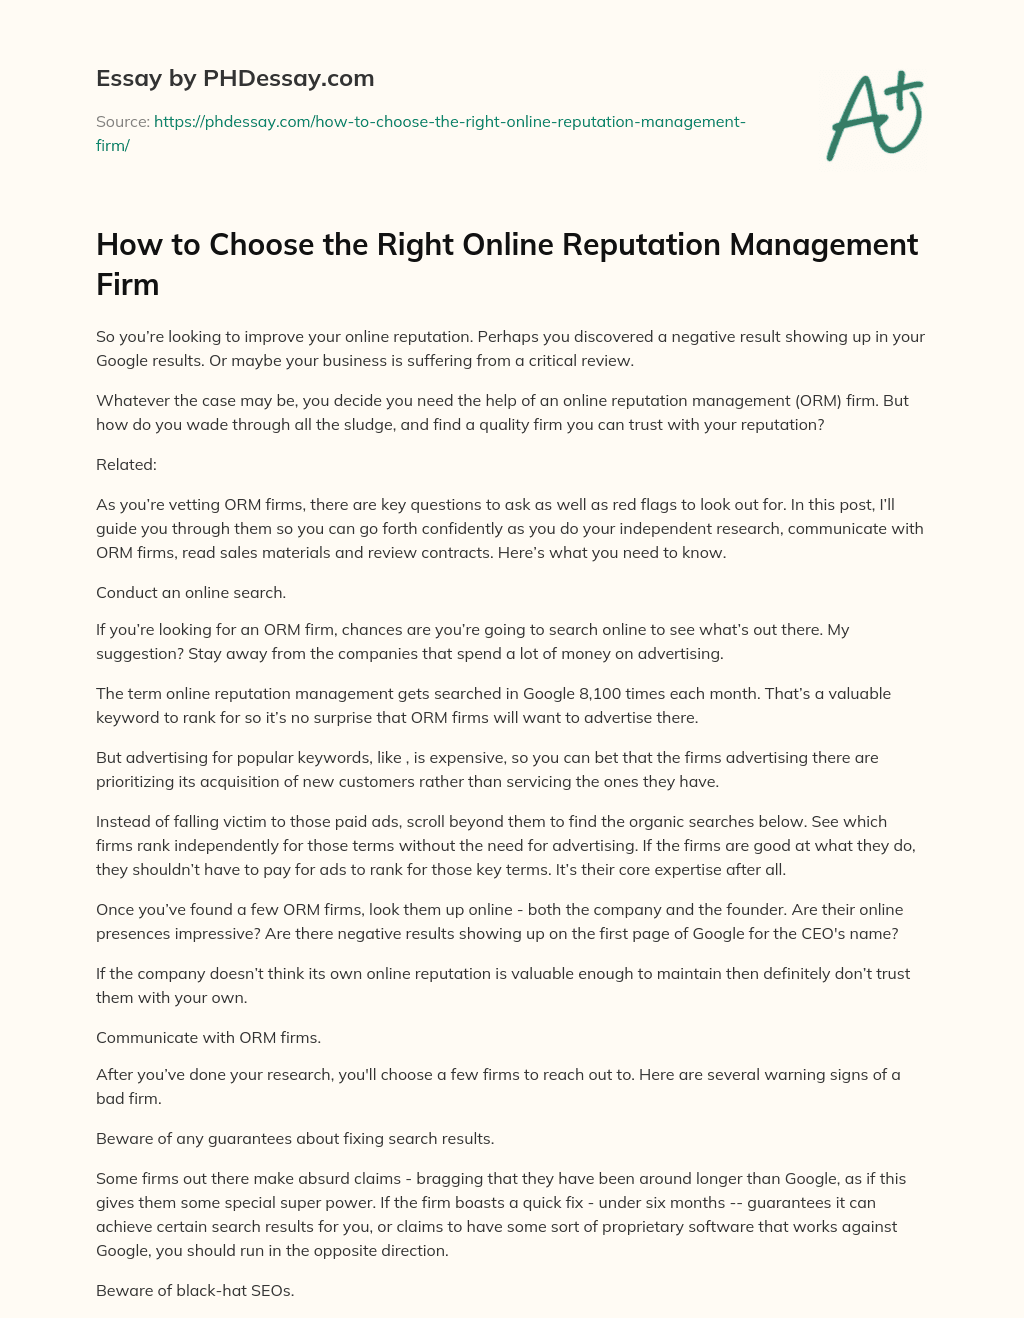 How to Choose the Right Online Reputation Management Firm essay